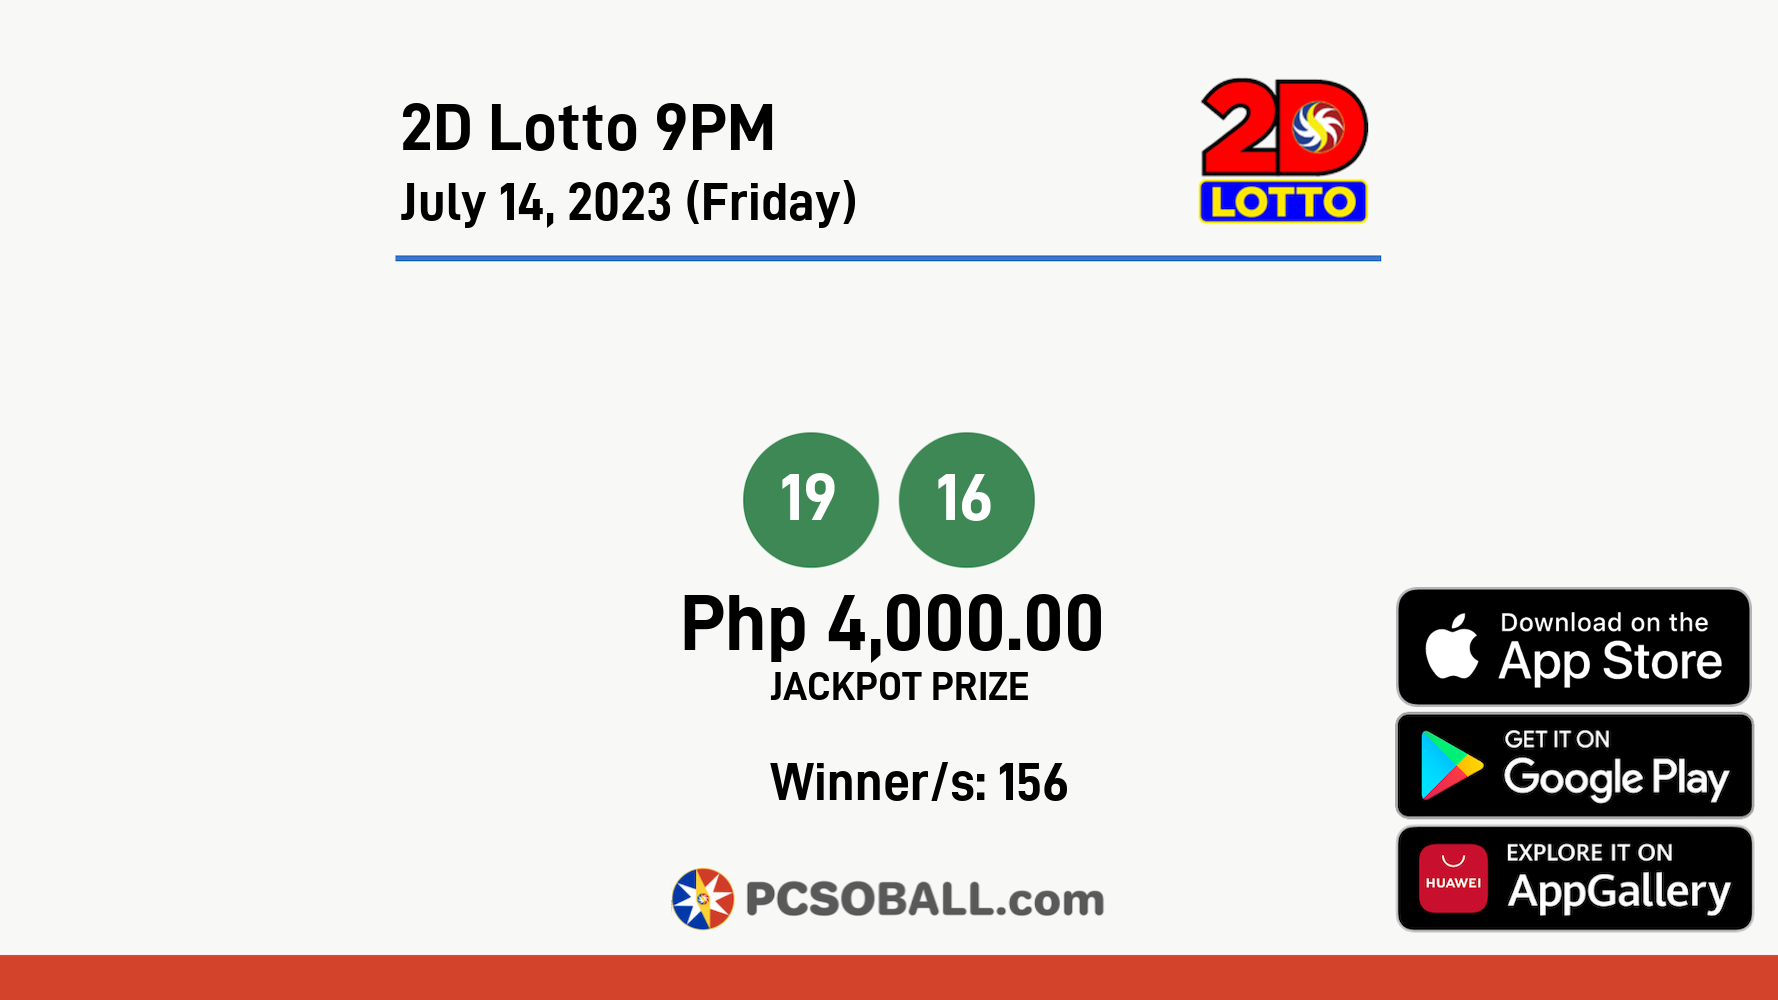 2D Lotto 9PM July 14, 2023 (Friday) Result